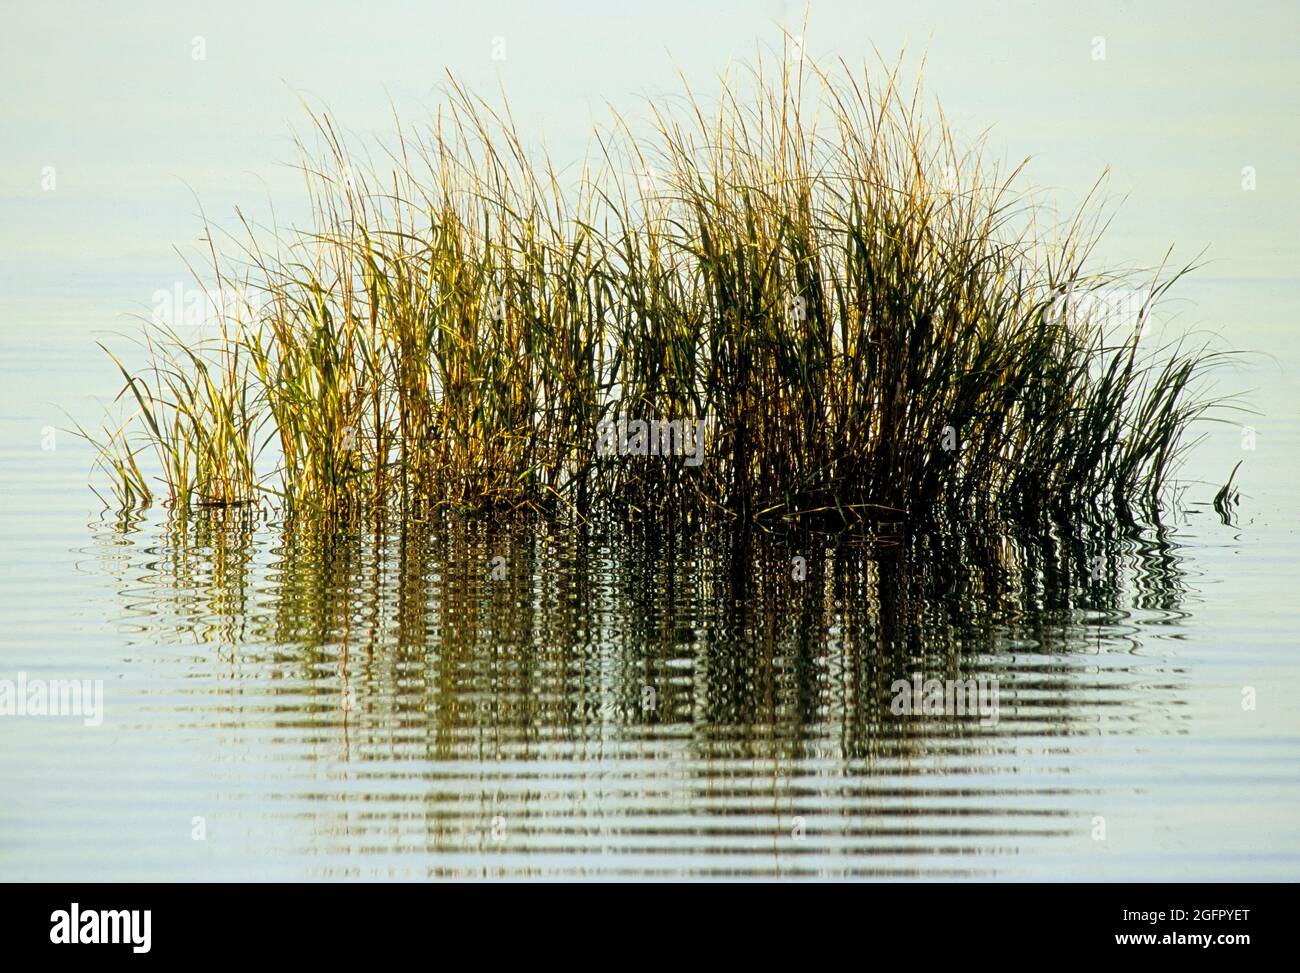 Spartina Grasses. Spartina Alterniflora. Jamaica Bay, Gateway. Spartina grasses in a salt marsh are able to thrive in a saline water environment. Stock Photo